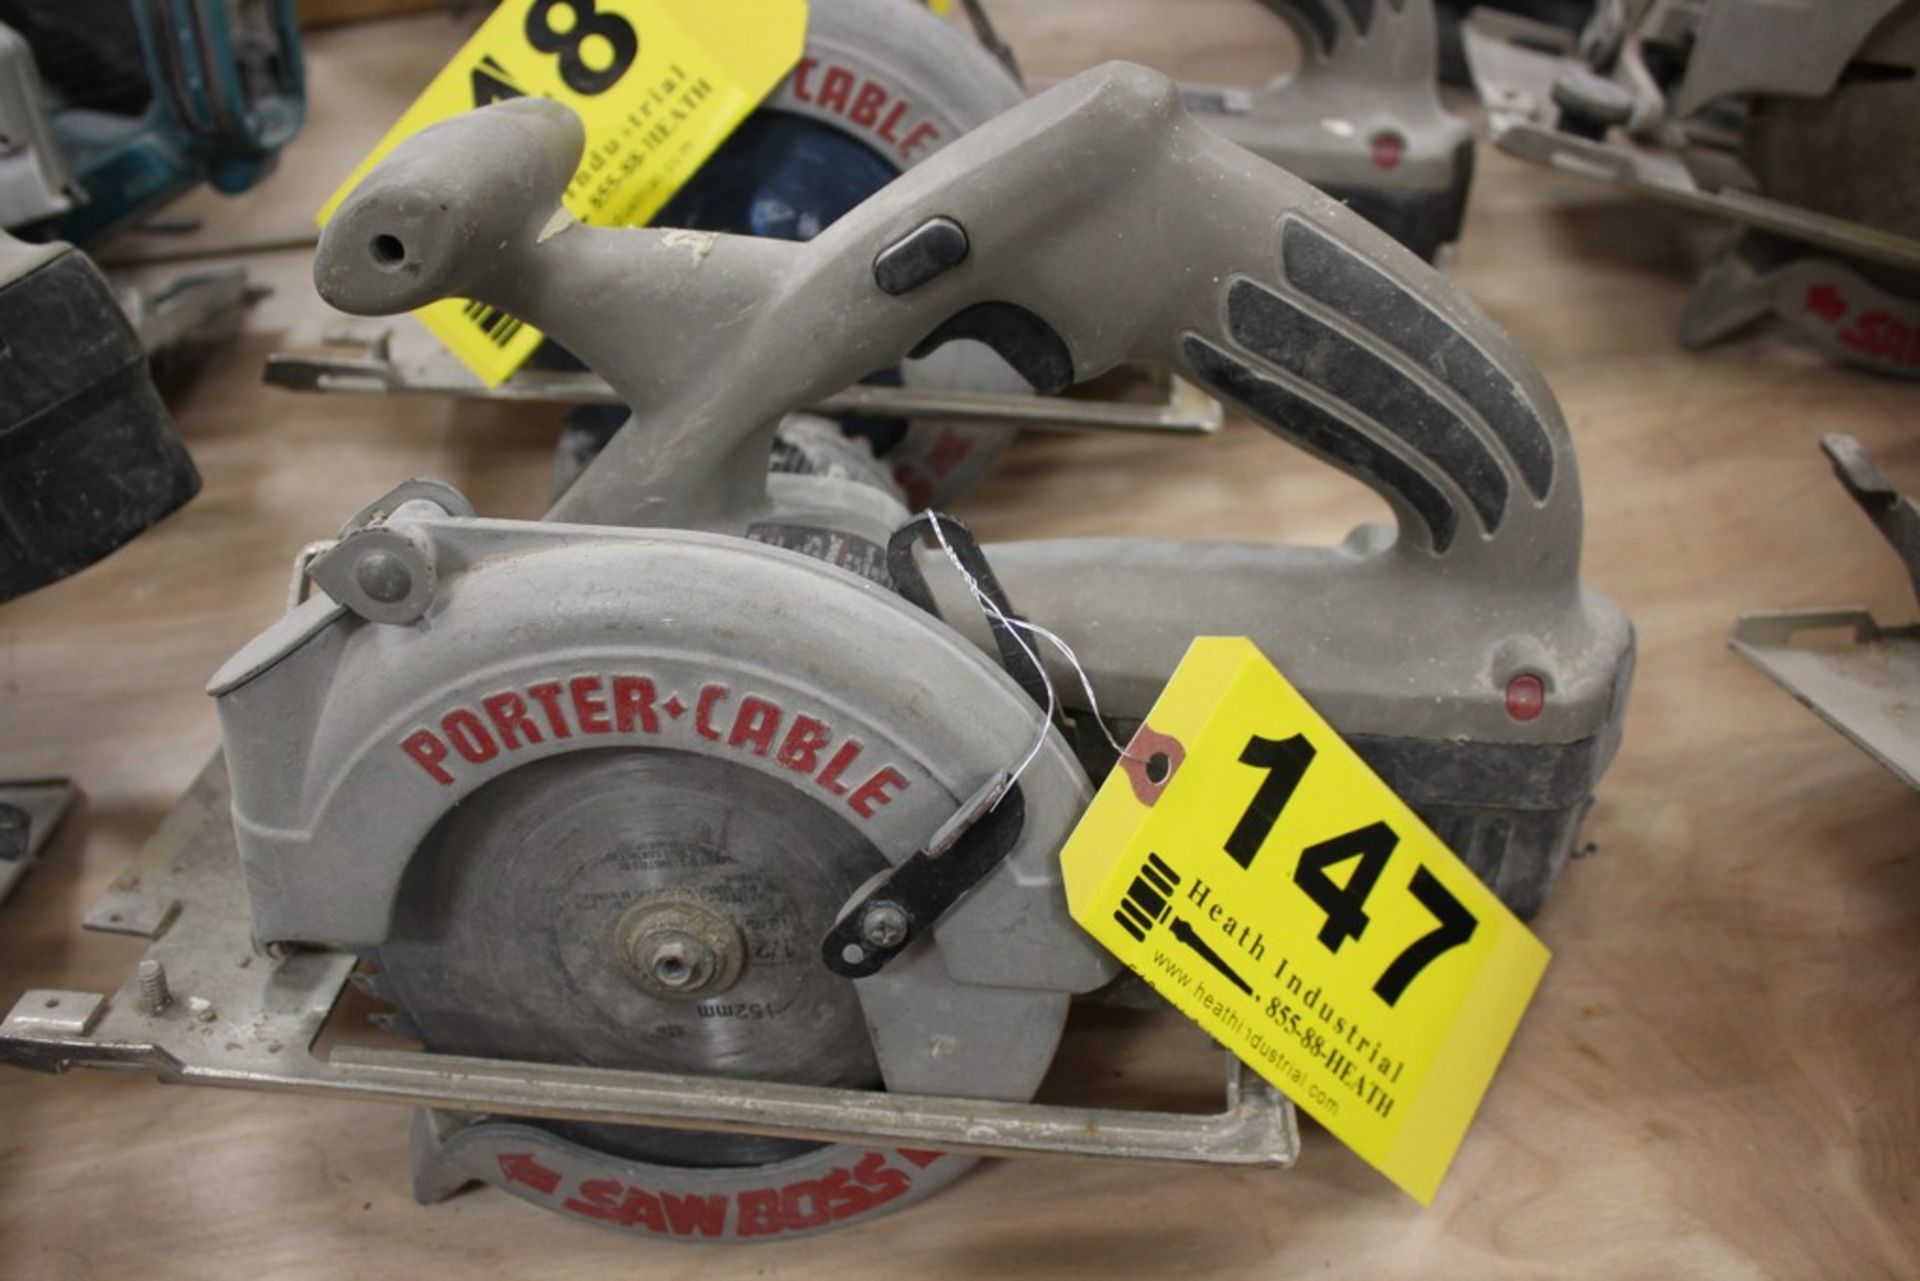 PORTER CABLE MODEL 845 BATTERY OPERATED CIRCULAR SAW 19.2 VOLT